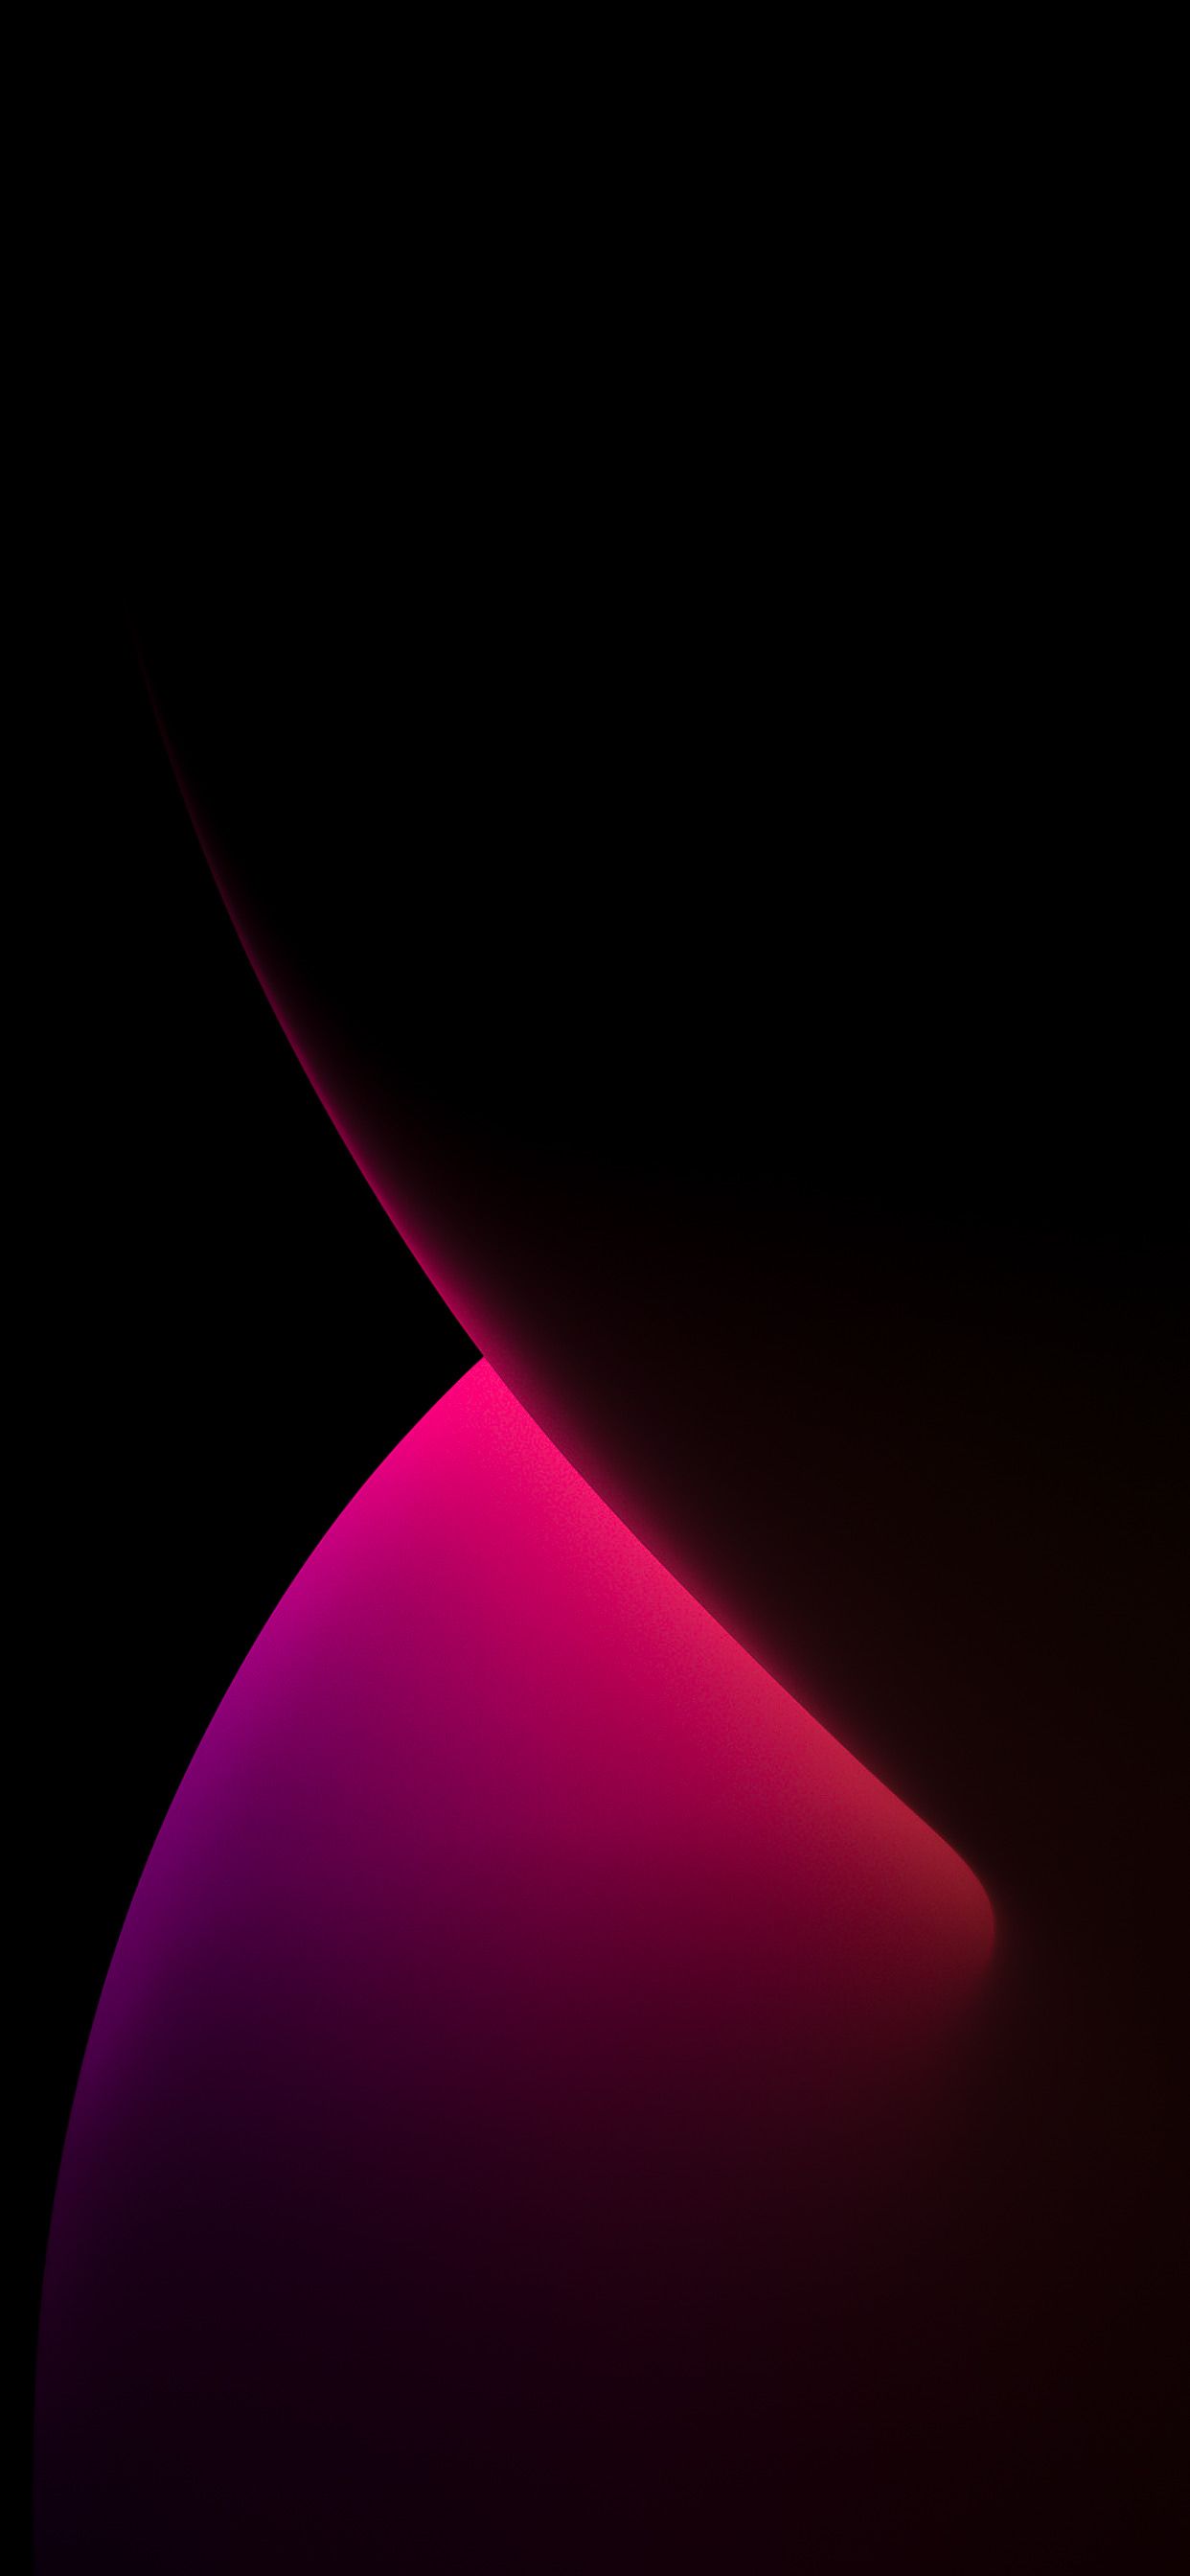 Aesthetic iOS 14 Wallpaper - KoLPaPer - Awesome Free HD Wallpapers